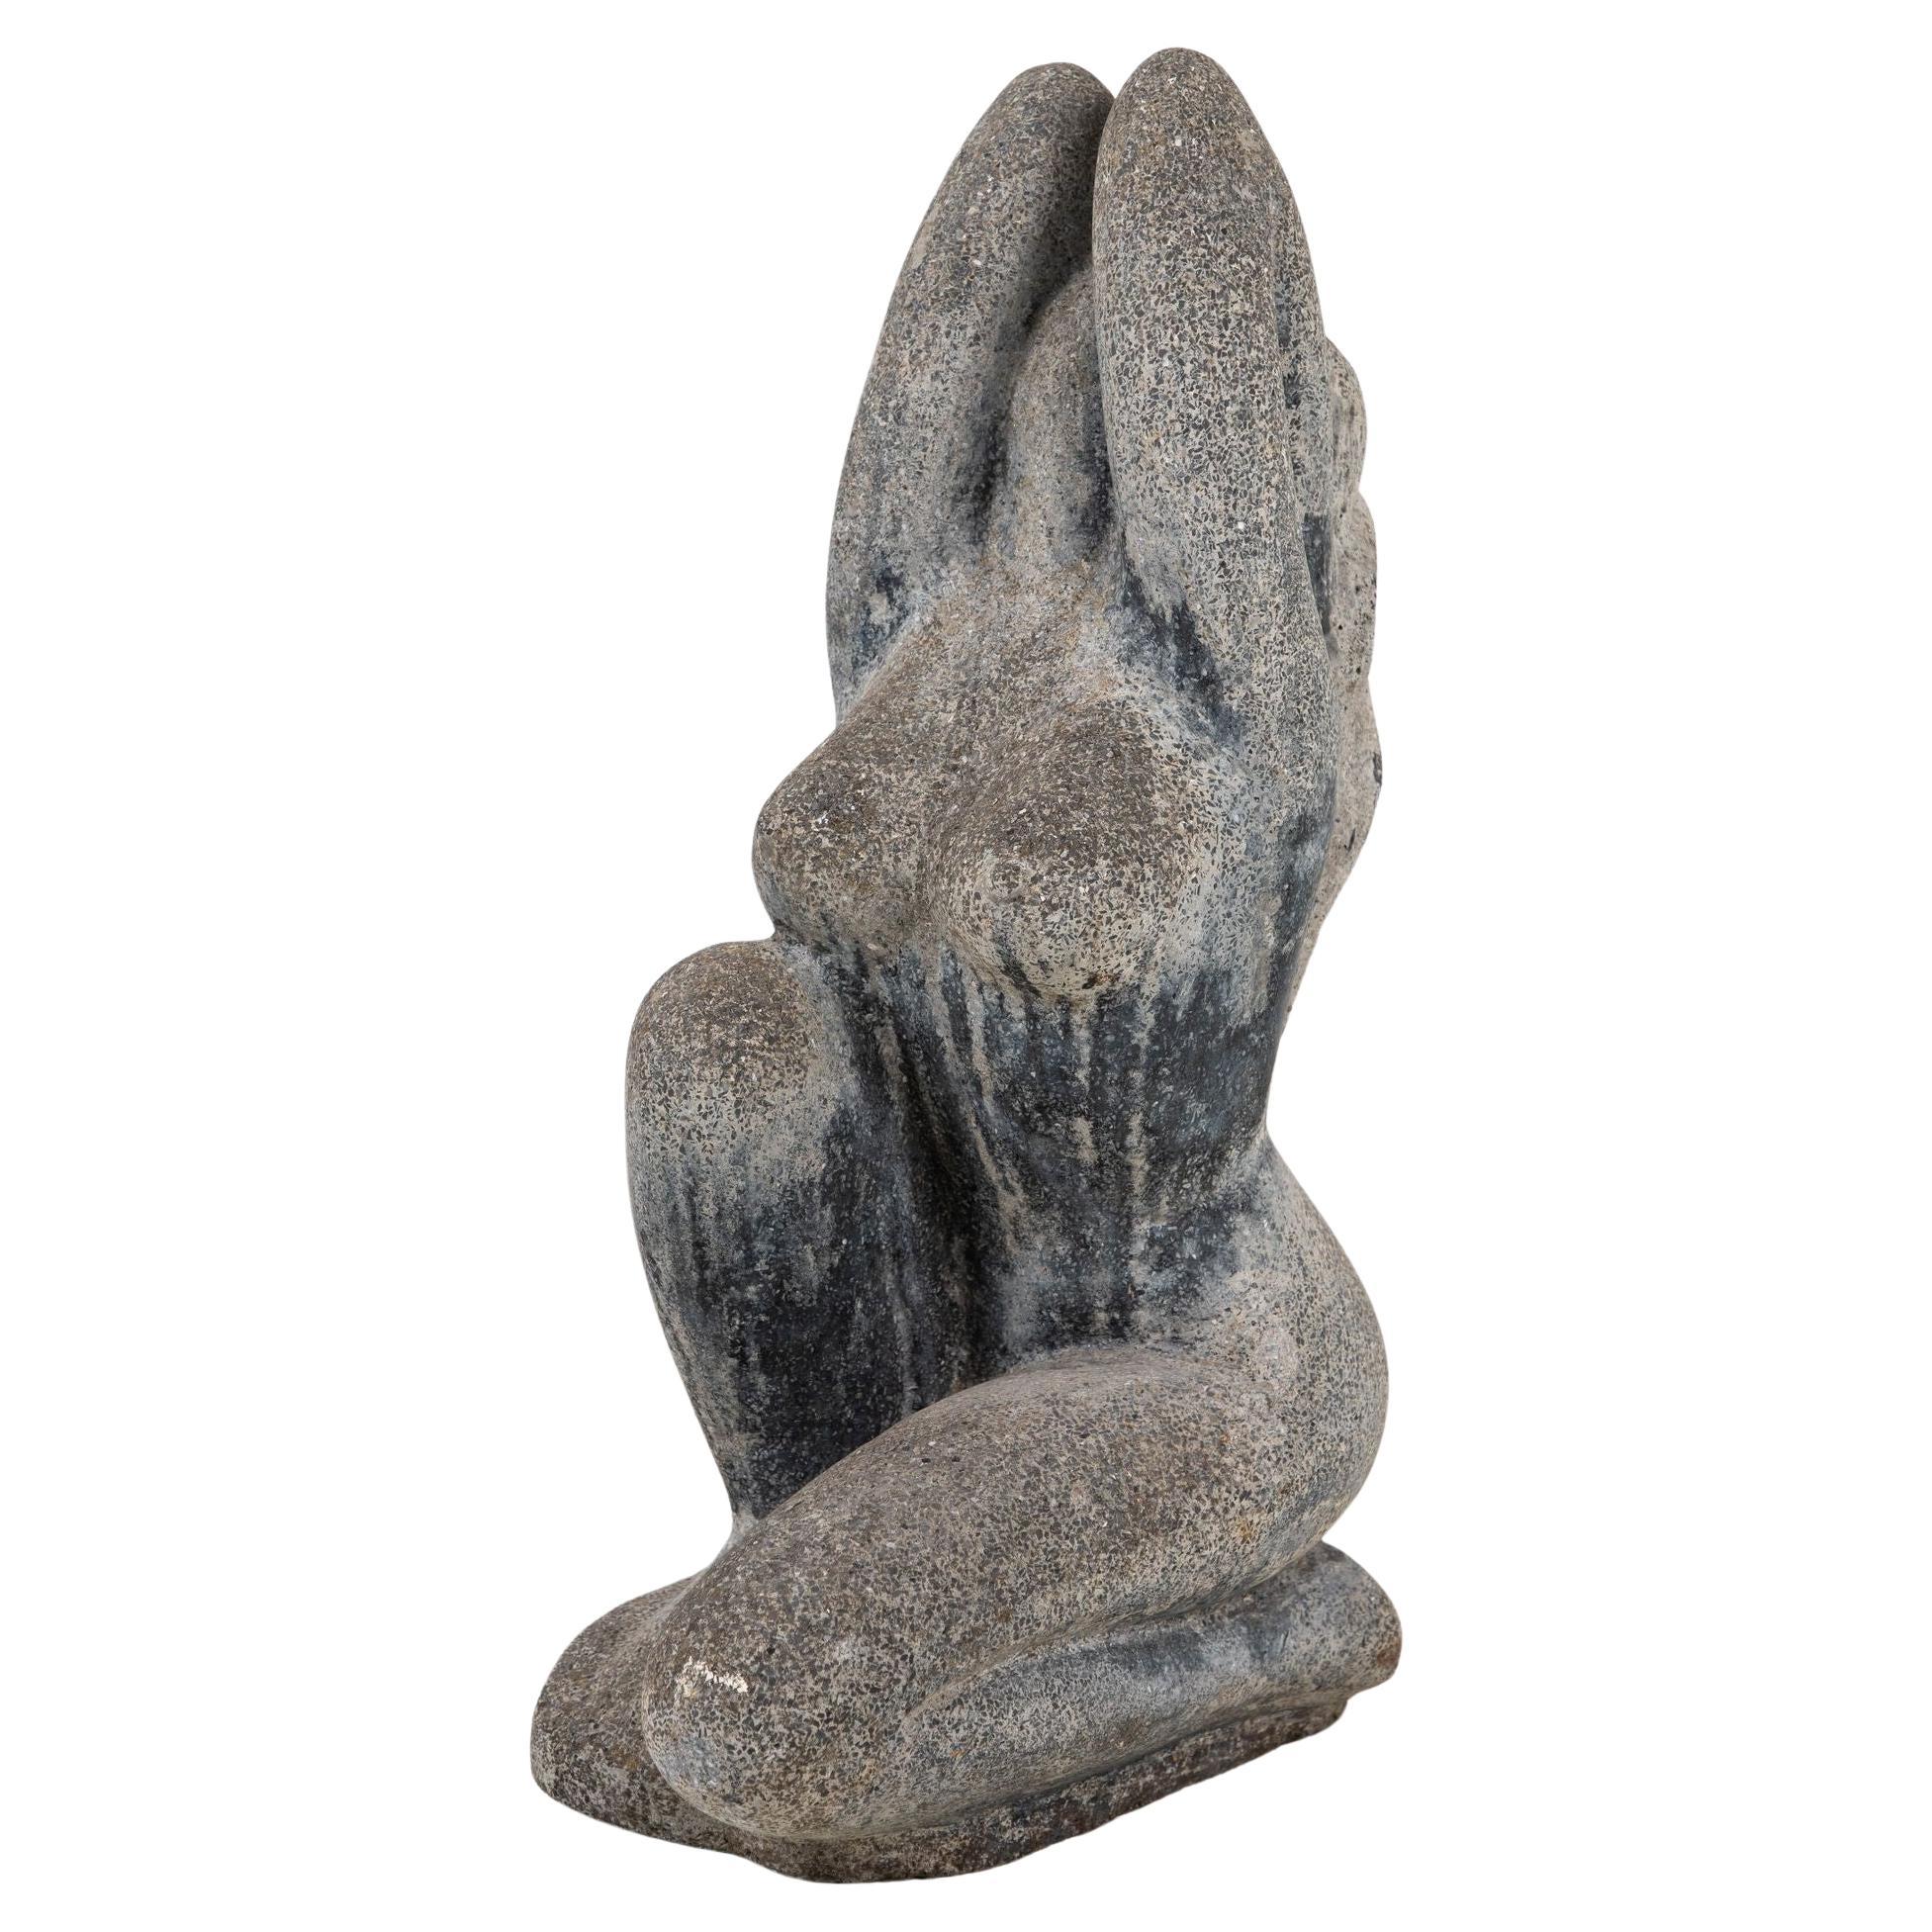 Stone Sculpture of a Woman with Long Flowing Hair, English 20th Century